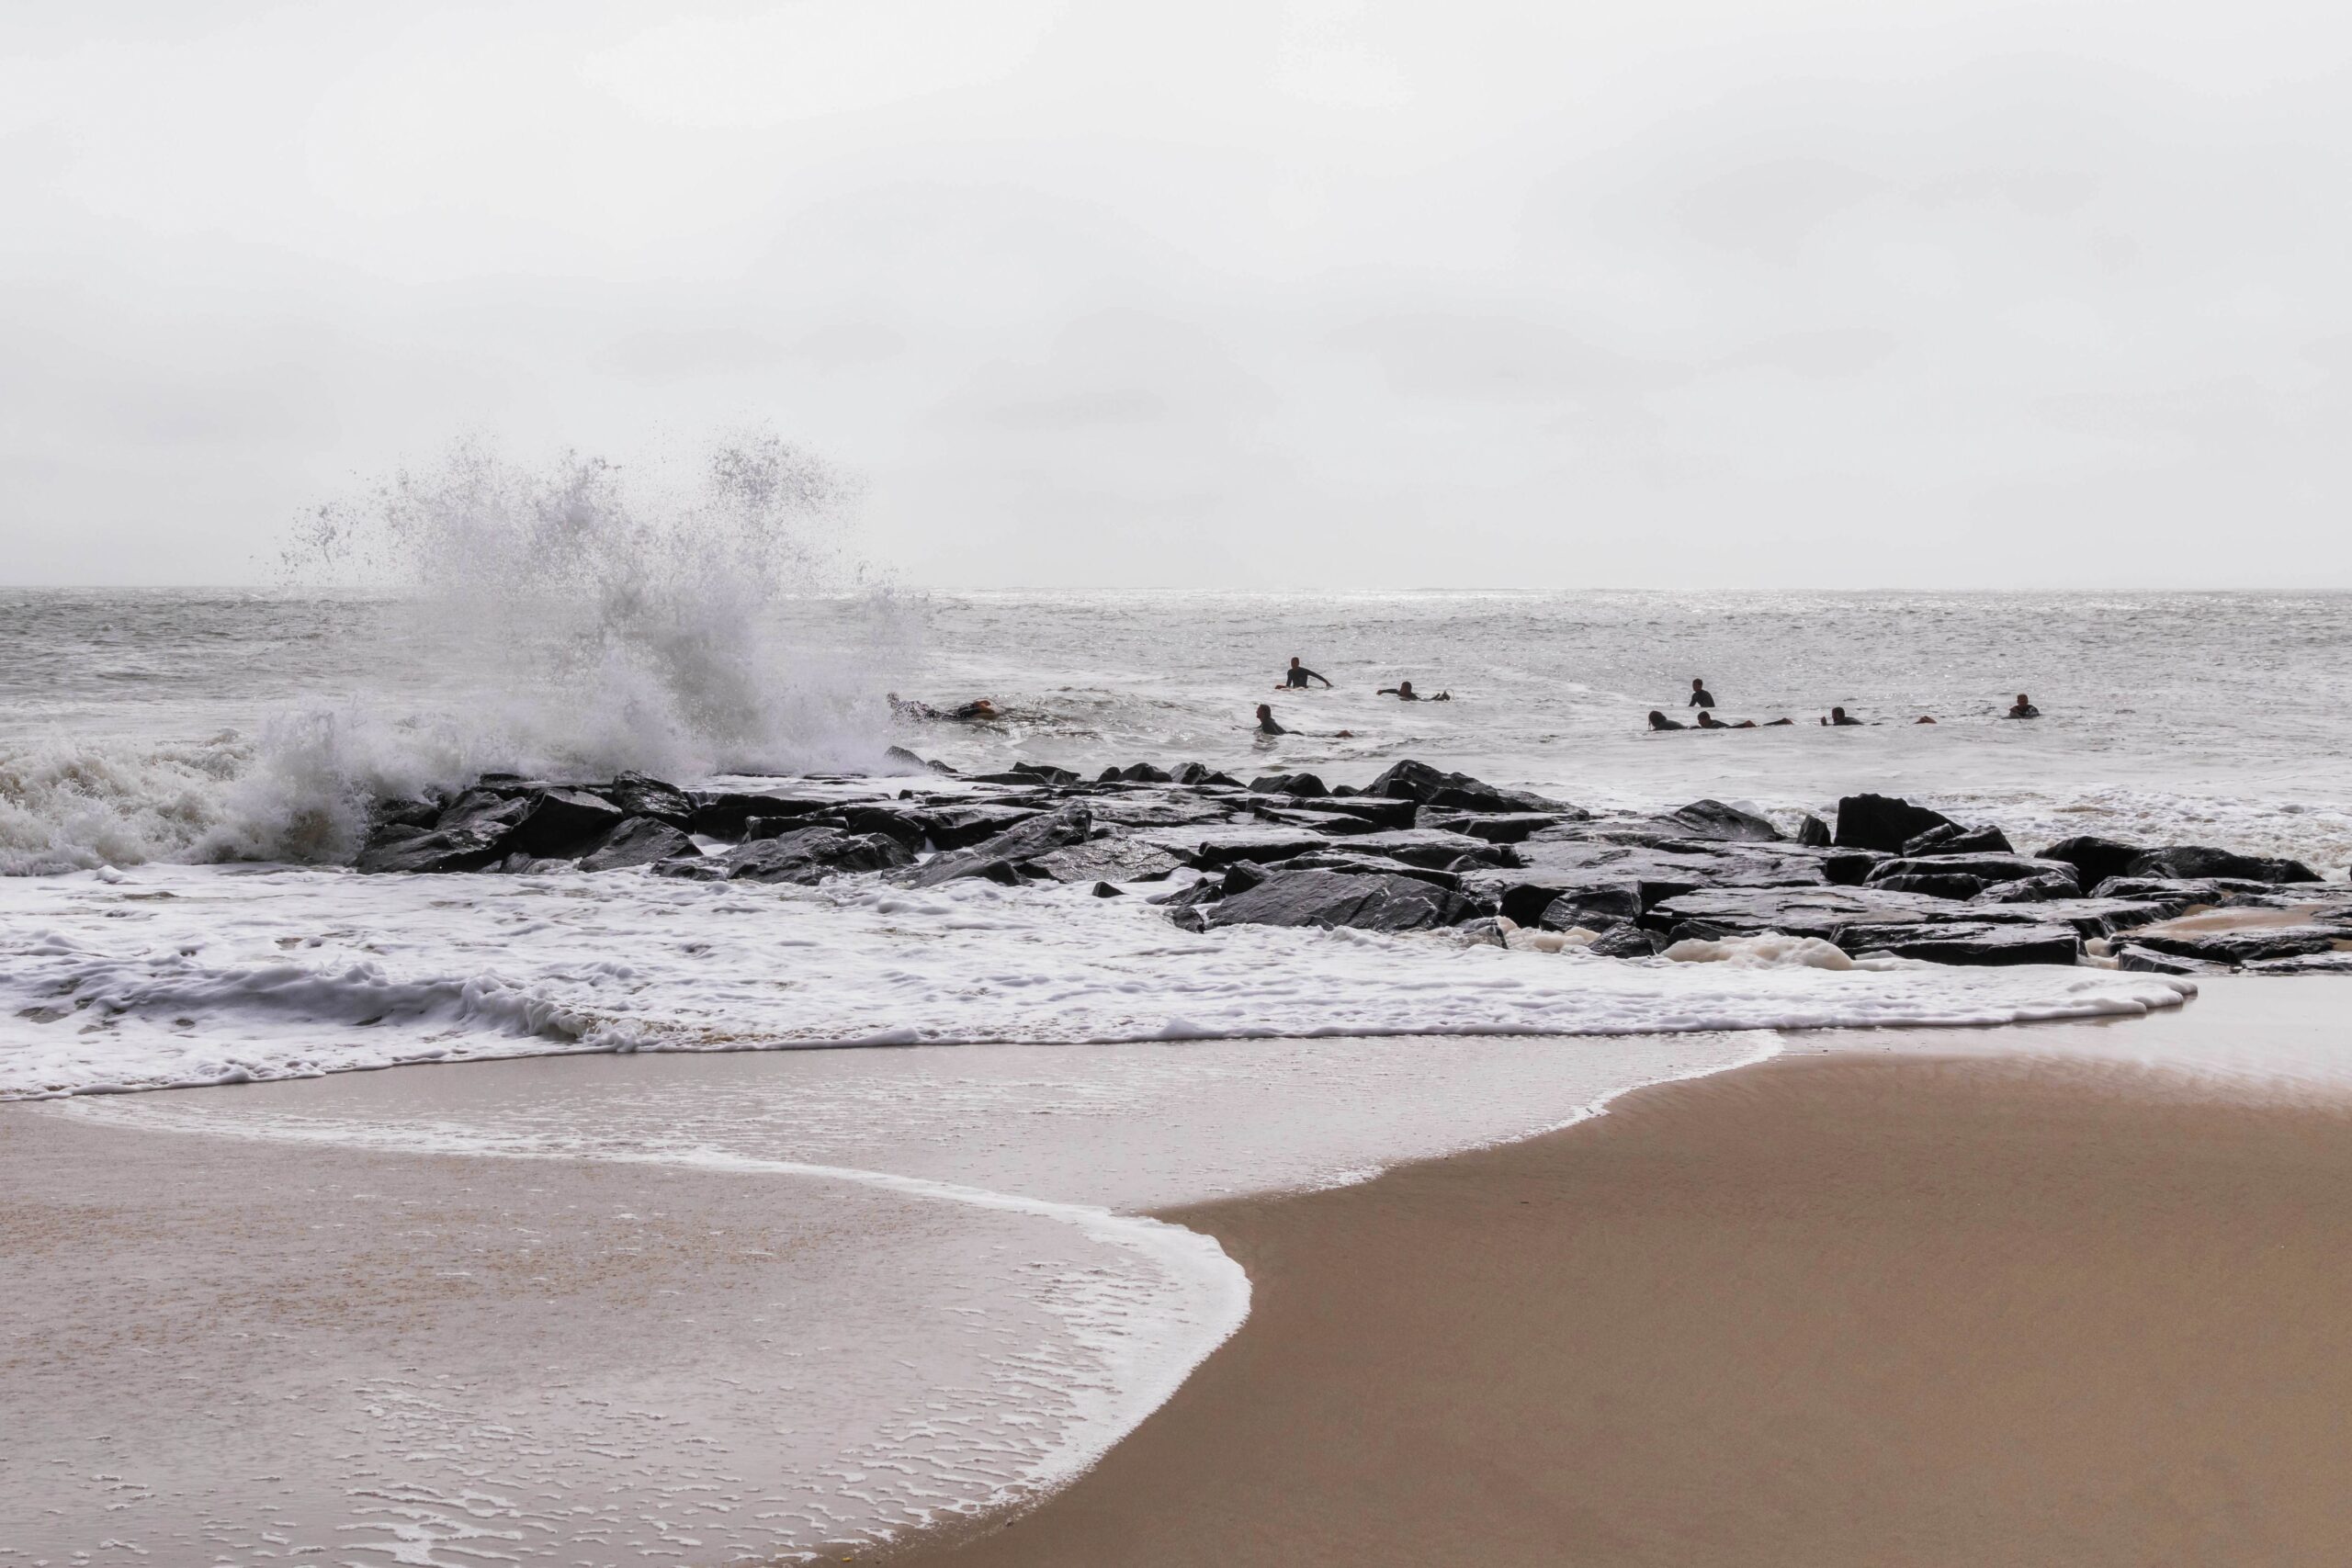 Surfers out in the ocean with a wave crashing on the rocks on a cloudy day